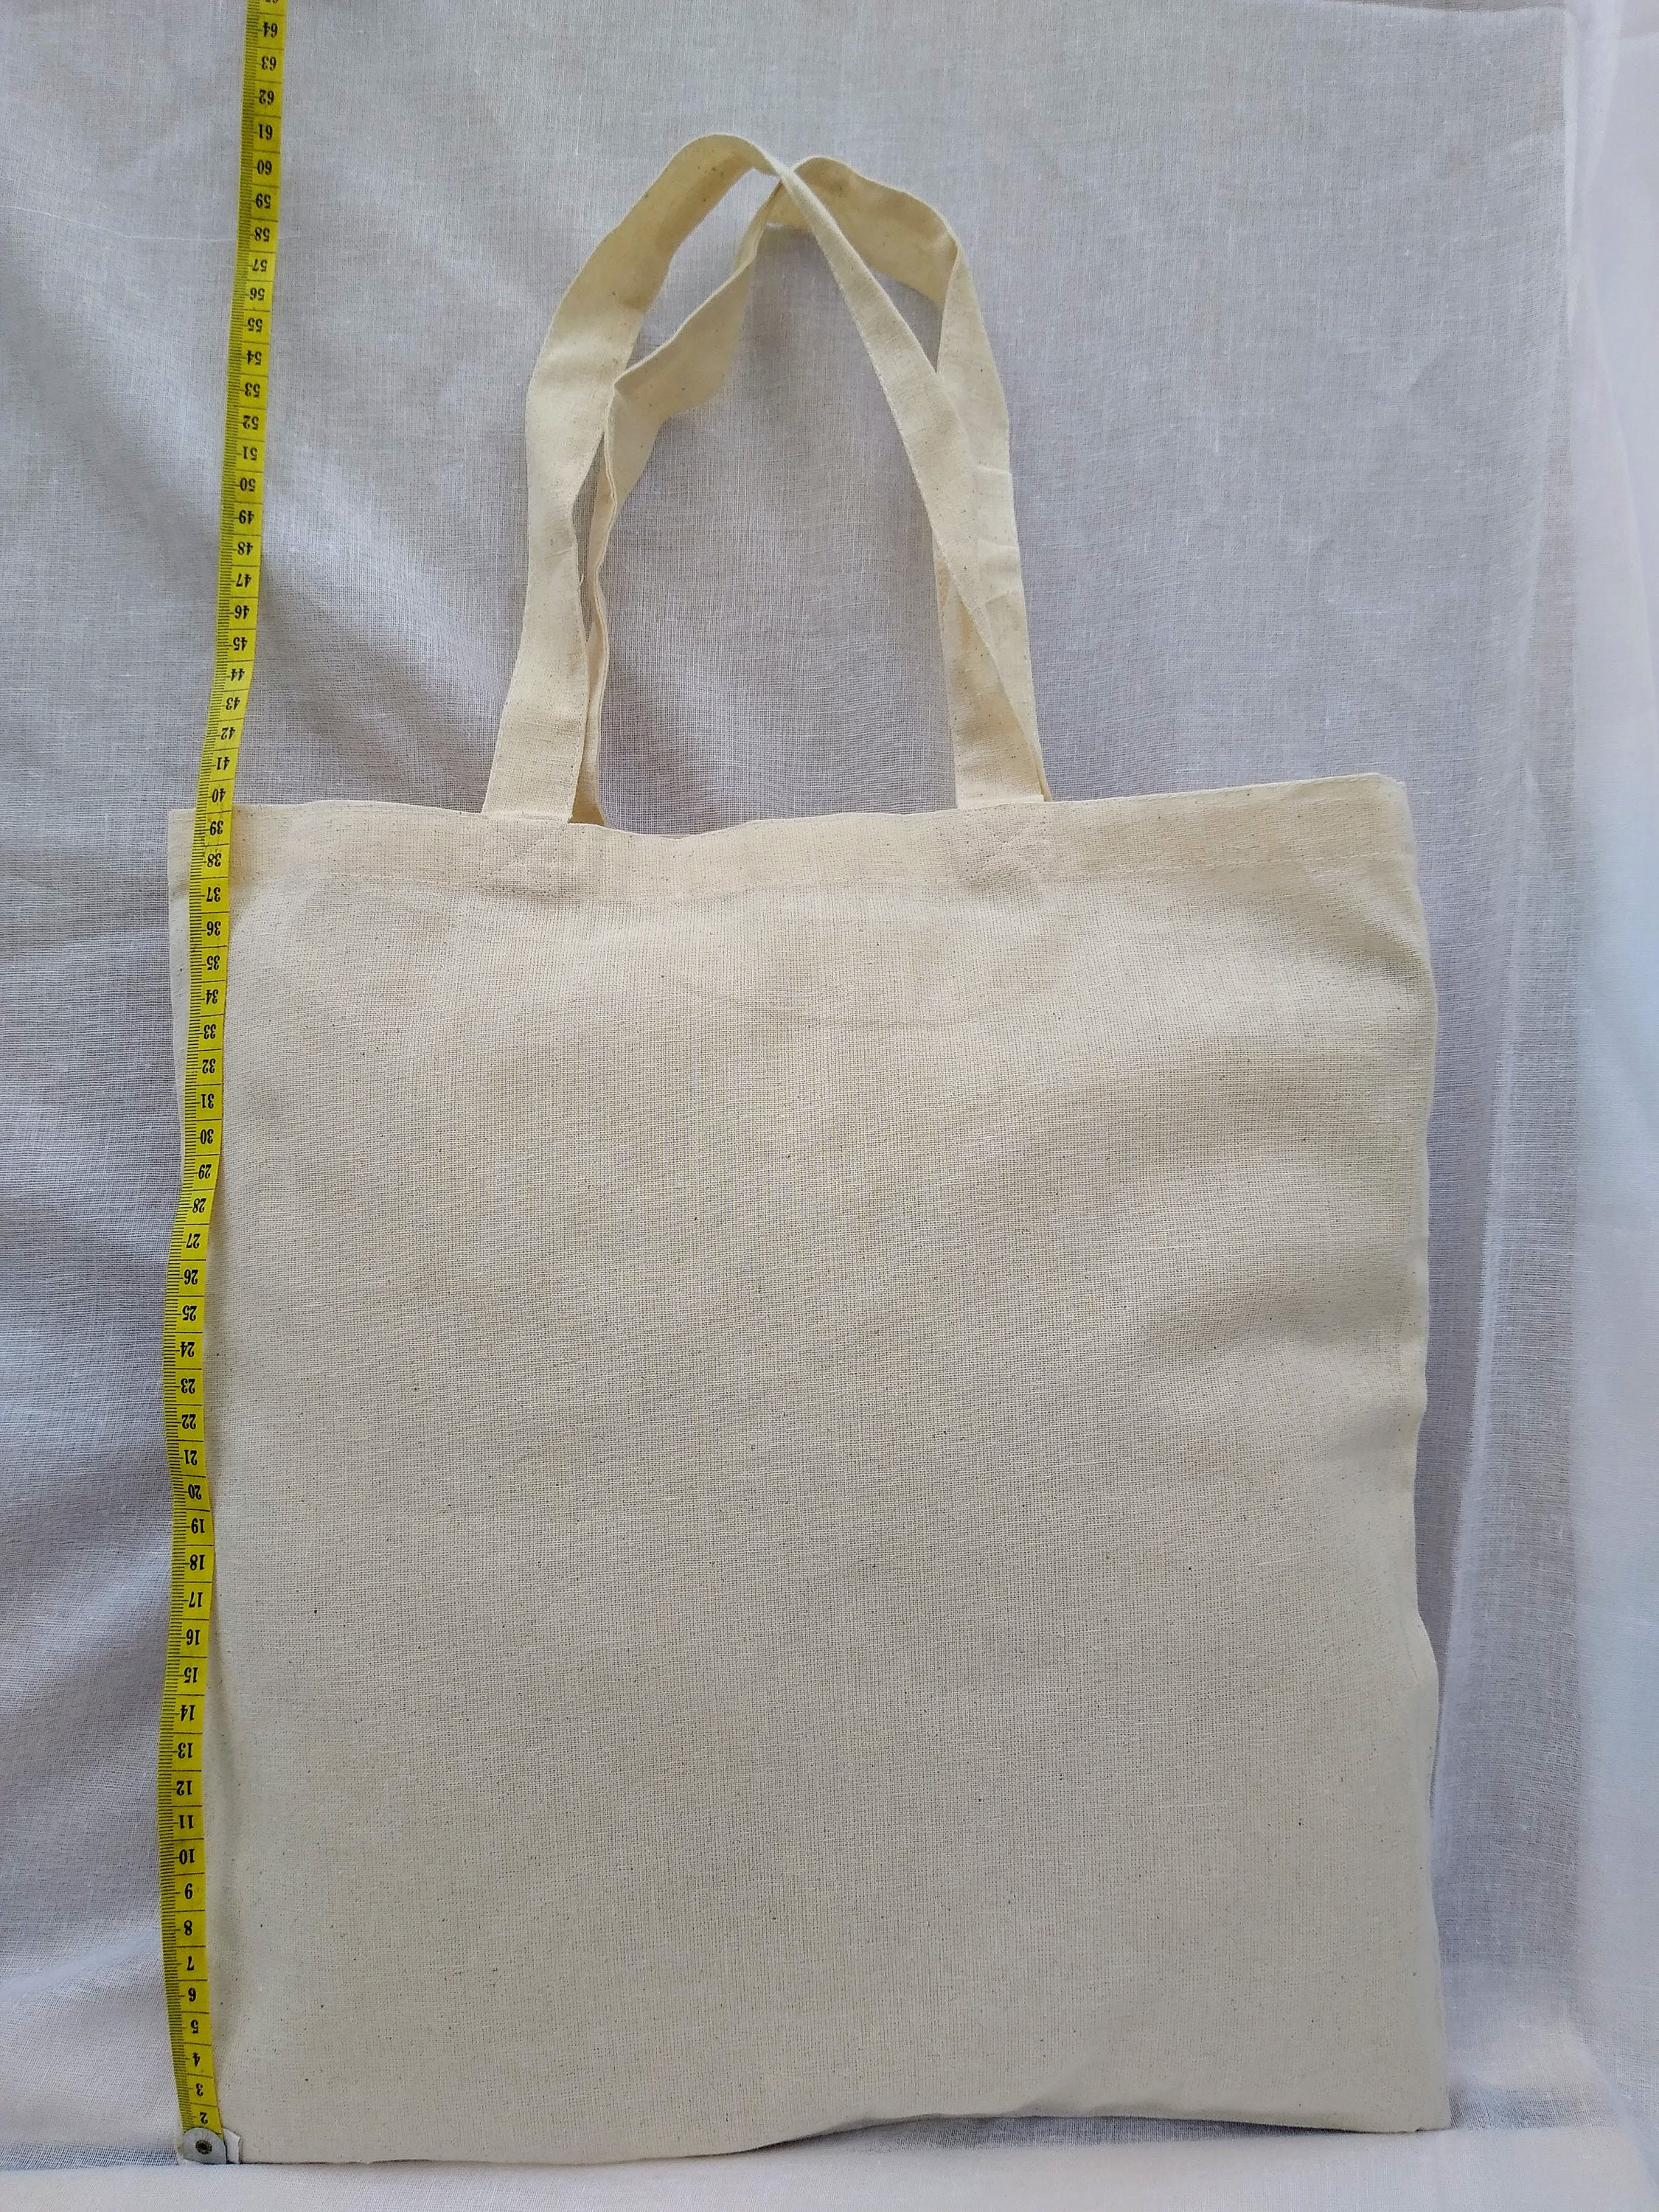 Cotton Carry Bags Manufacturers,Cotton Carry Bags Price from Suppliers  Wholesaler Exporter in India